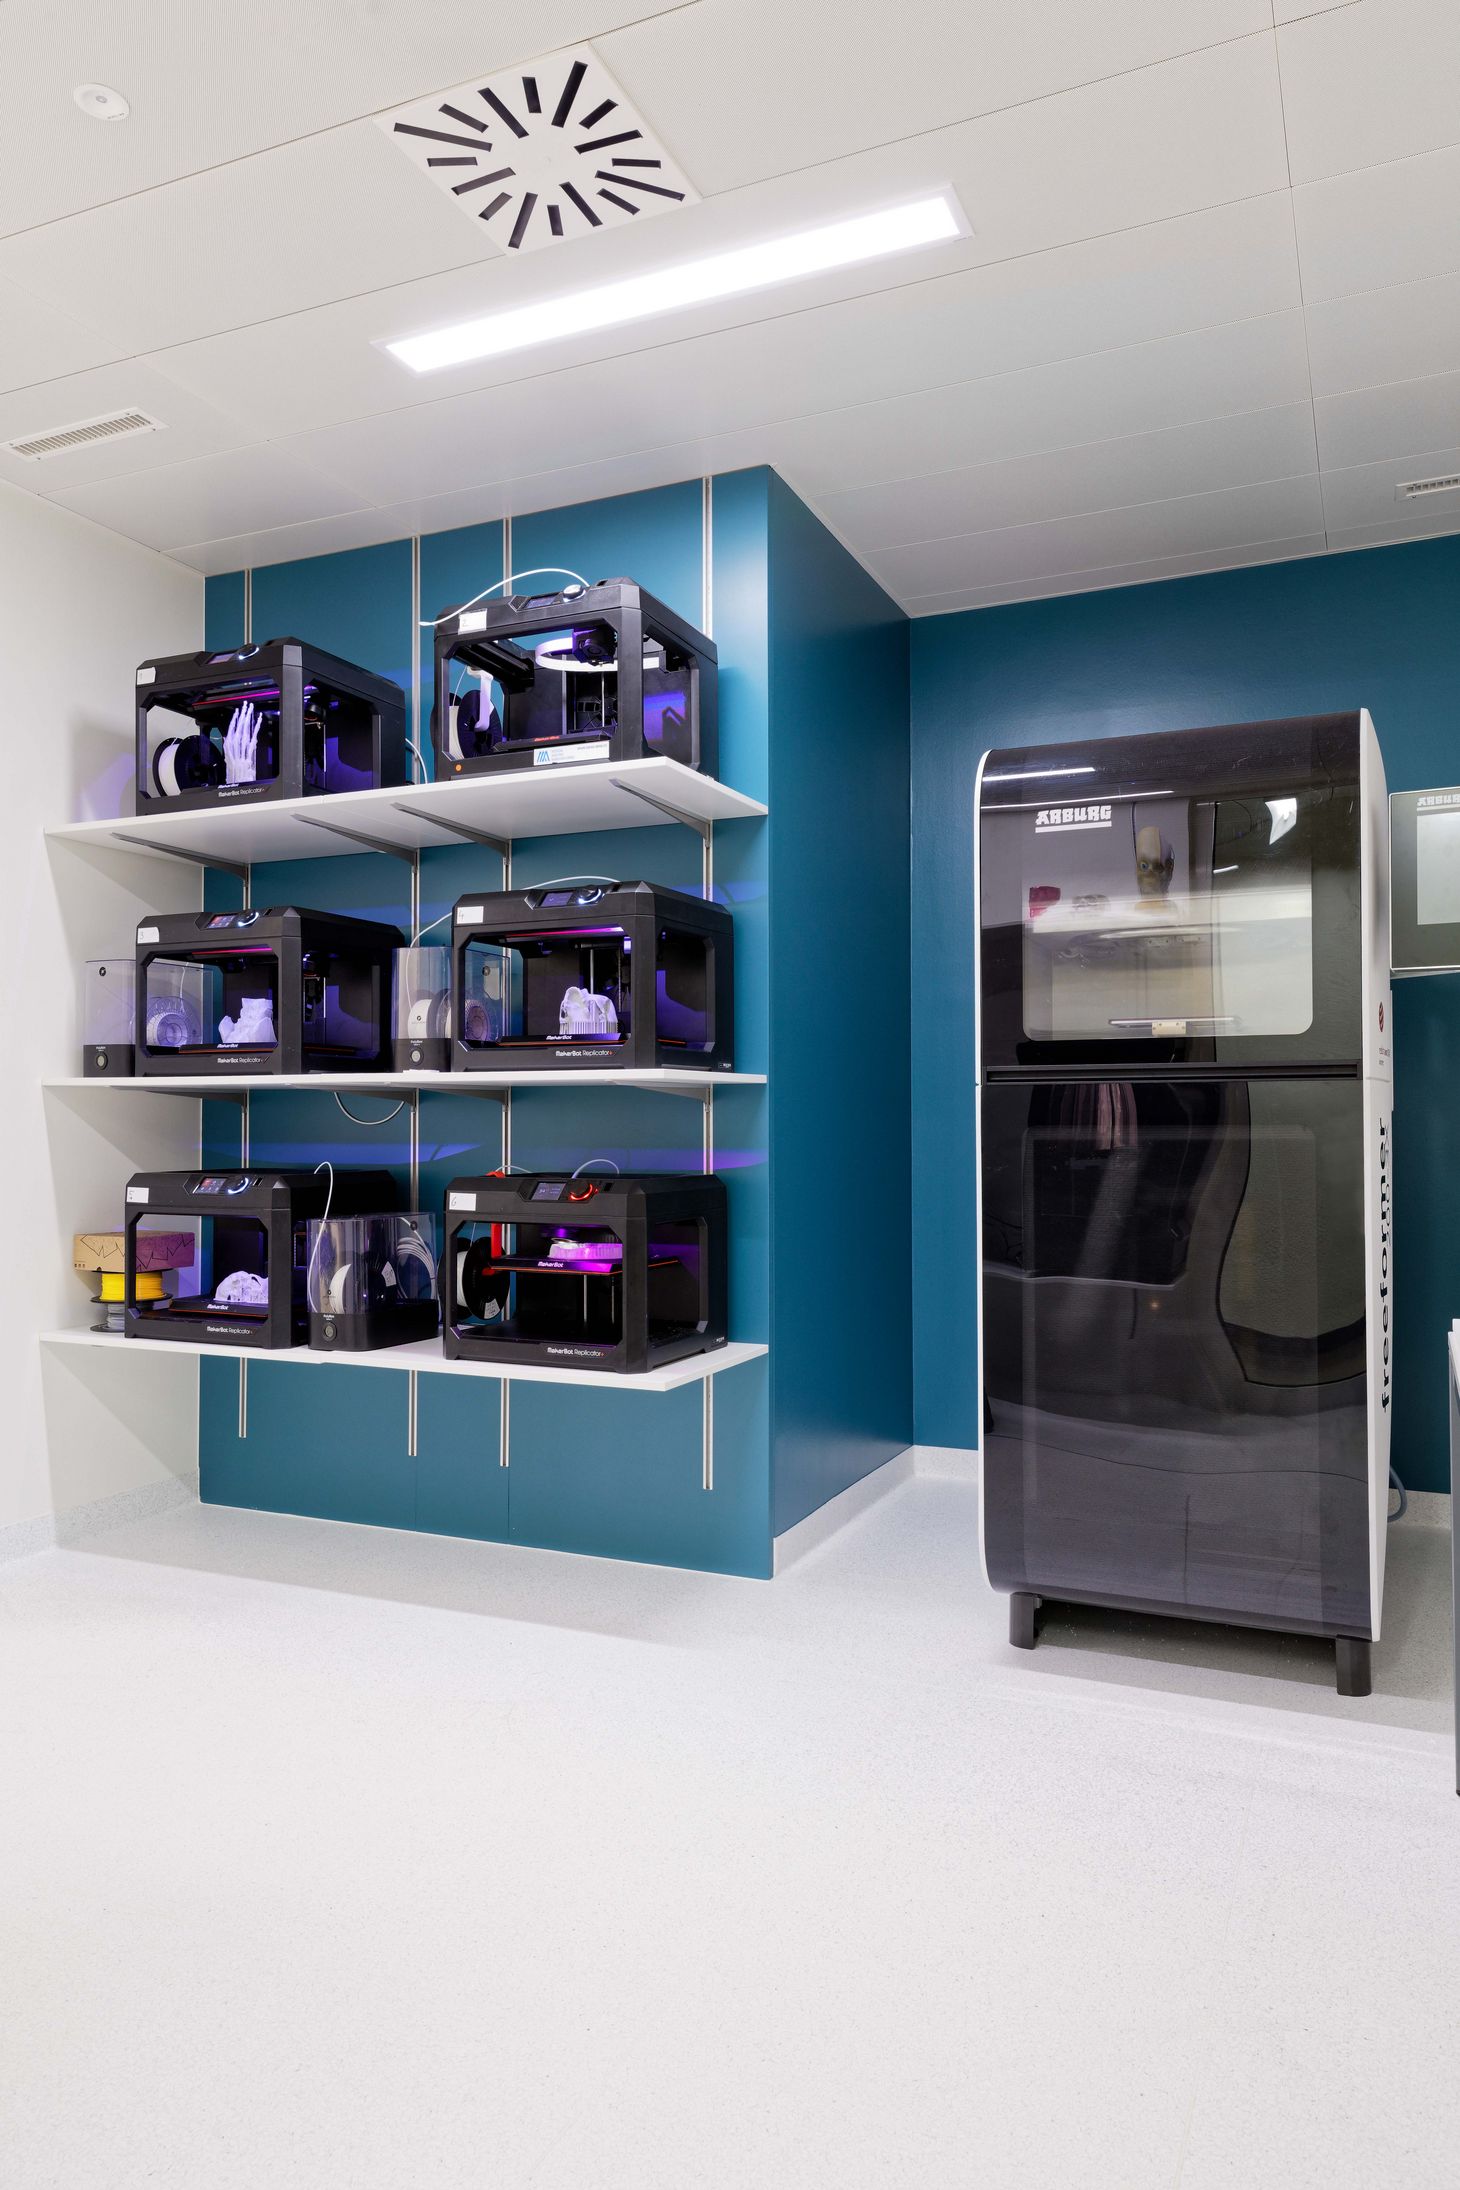 Picture of the 3D Print Lab at the University Hospital Basel